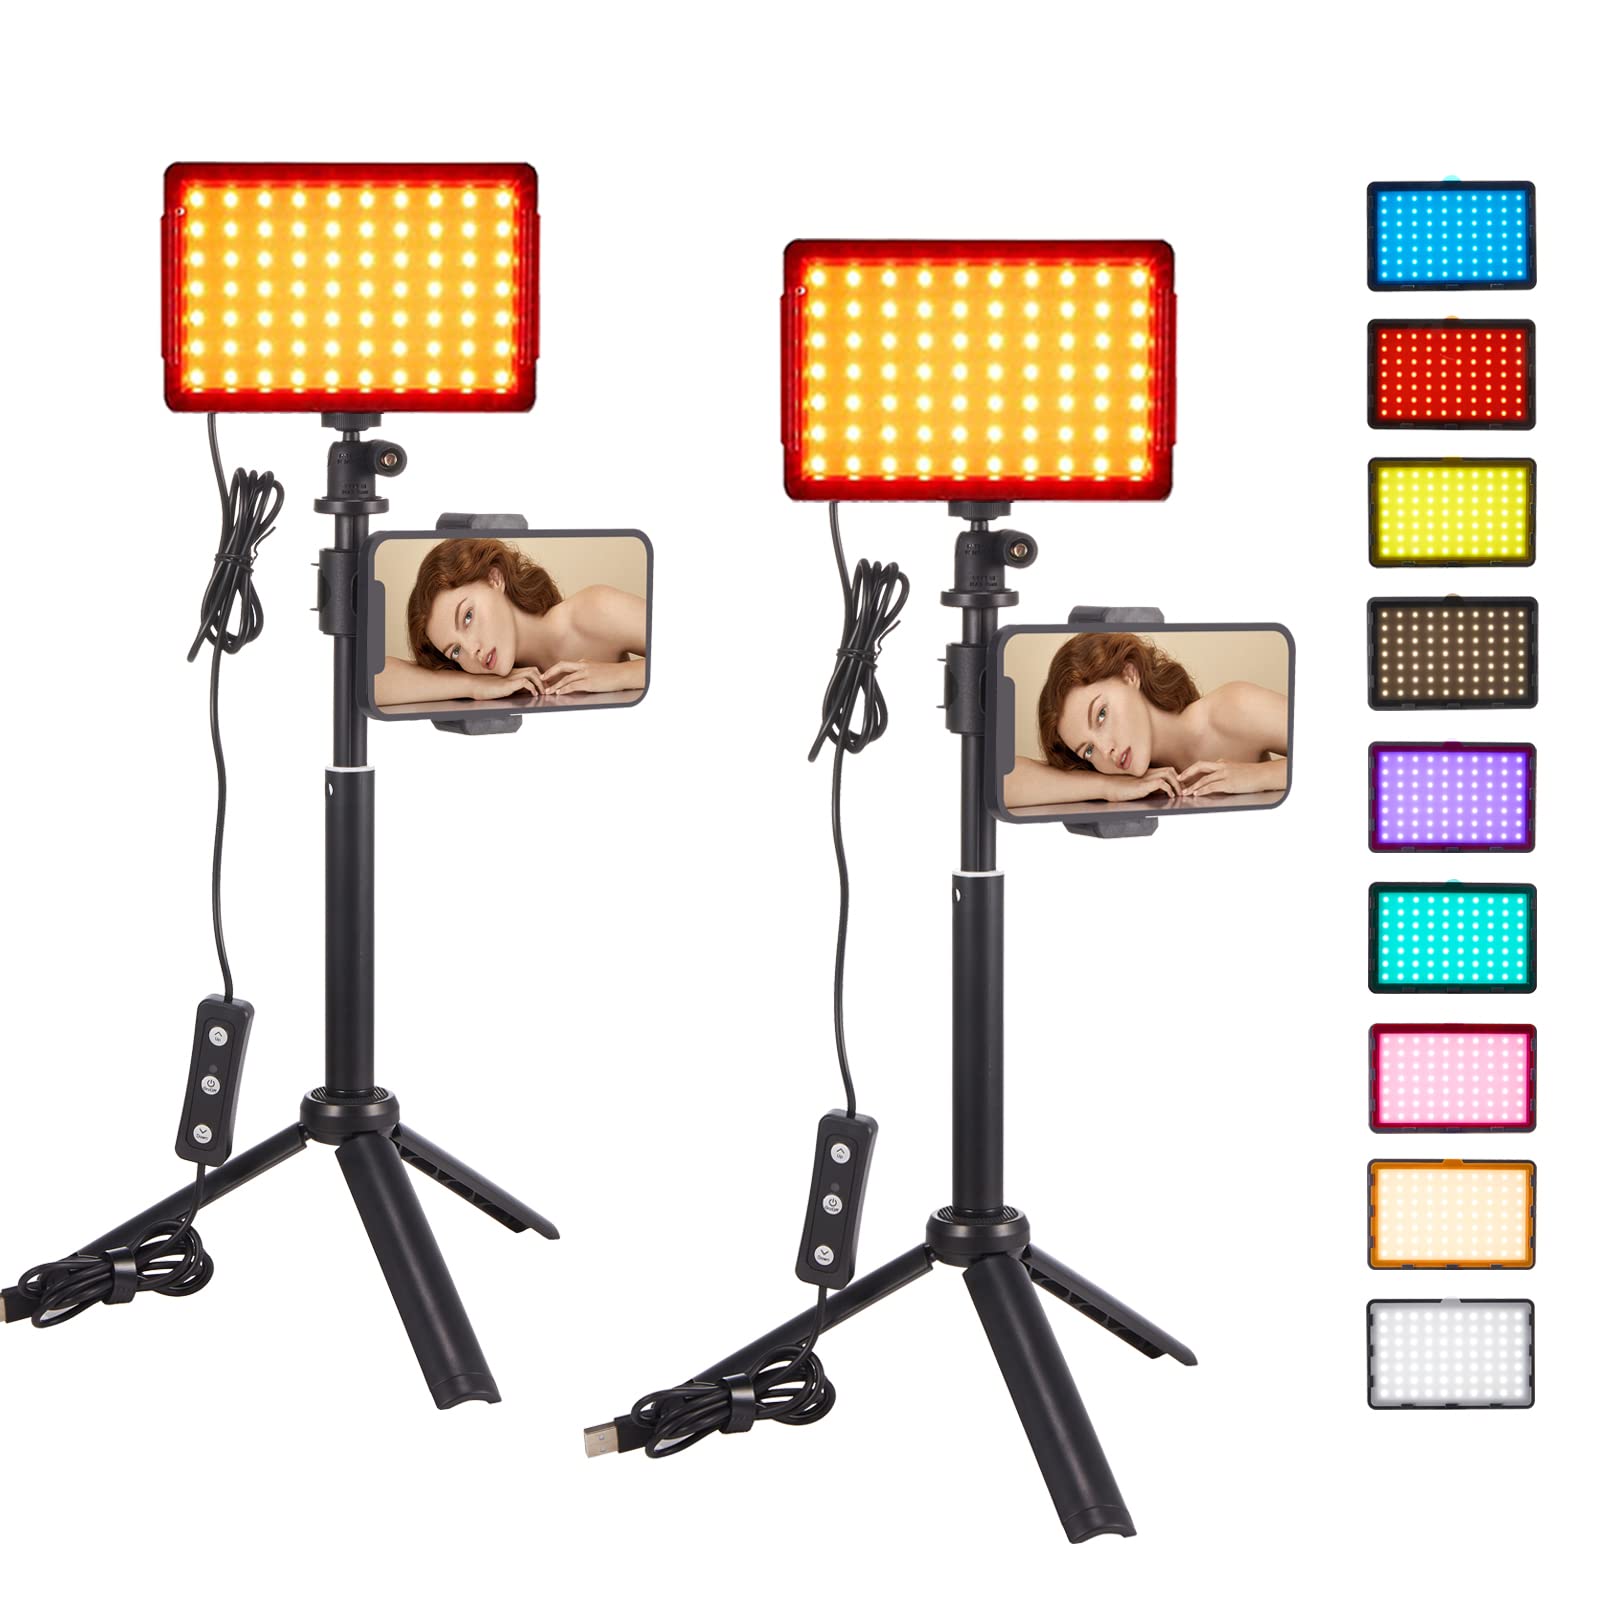 EMART 60 LED Continuous Portable Photography Lighting Kit for Table Top  Photo Video Studio Light Lamp with Color Filters - 2 Packs